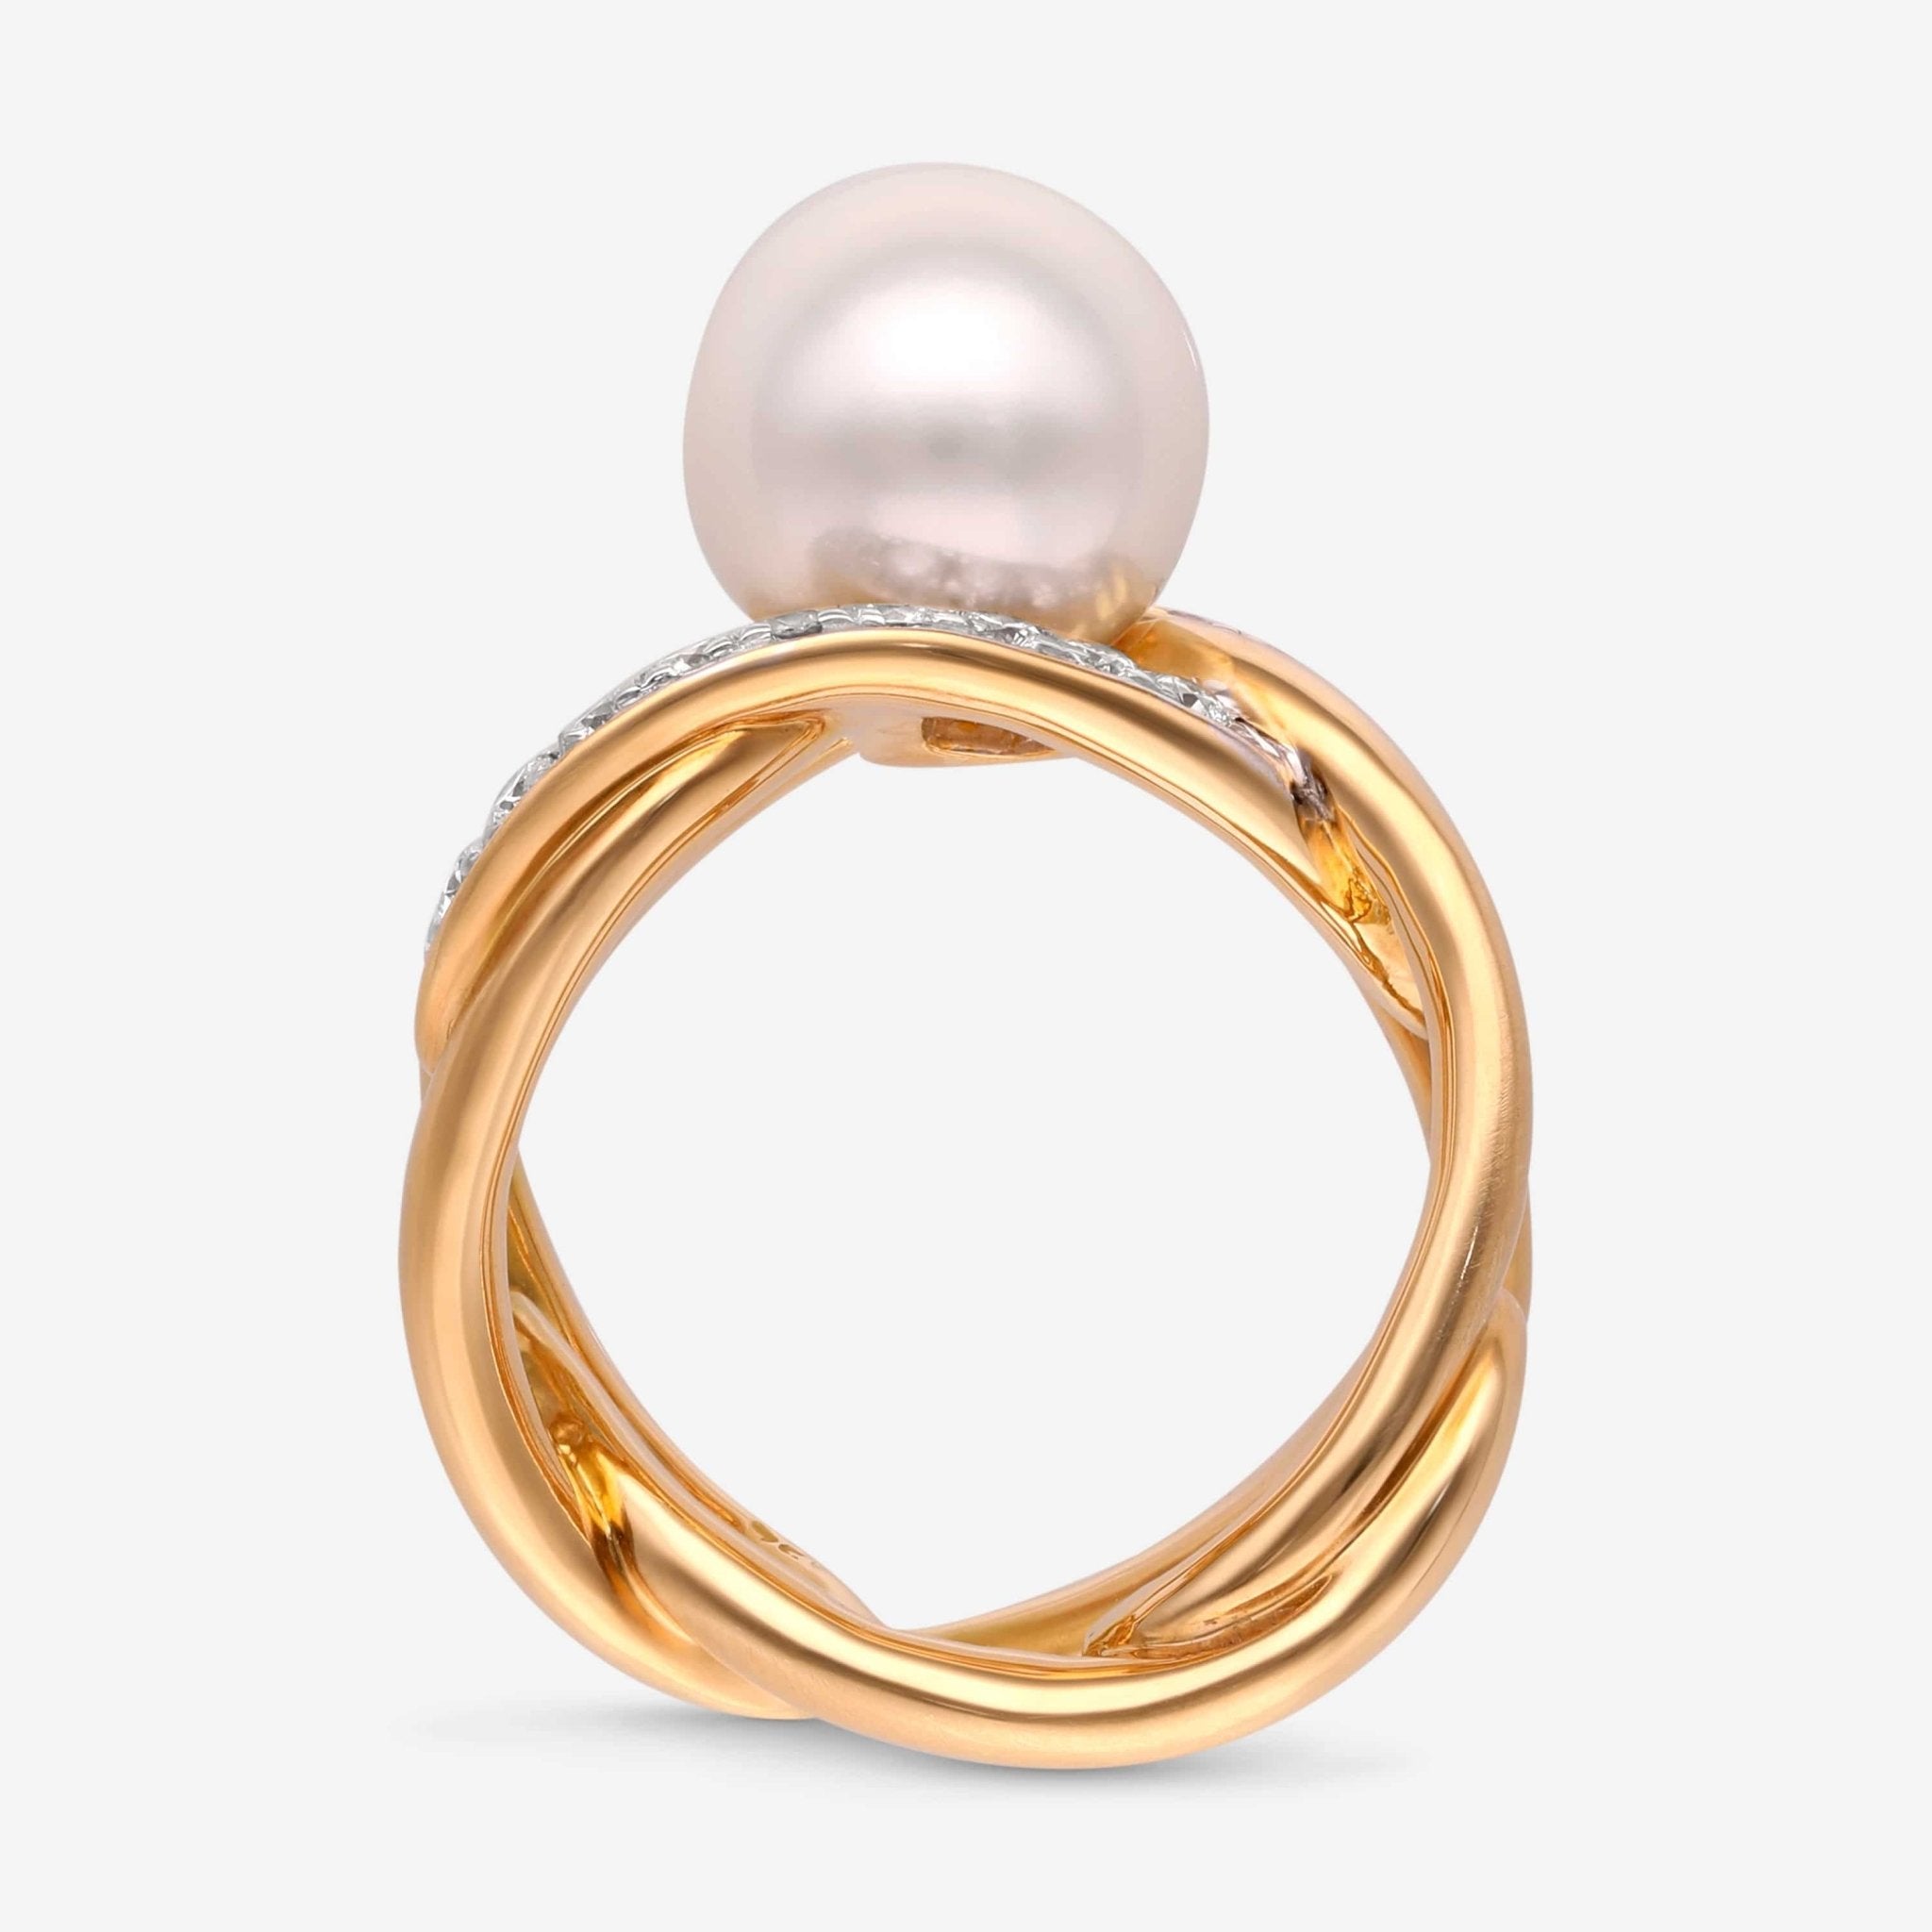 Assael Angela Cummings 18K Yellow Gold, South Sea Pearl and Diamond 0.84ct. tw. Statement Ring Sz. 7 ACR0015 - THE SOLIST - Assael